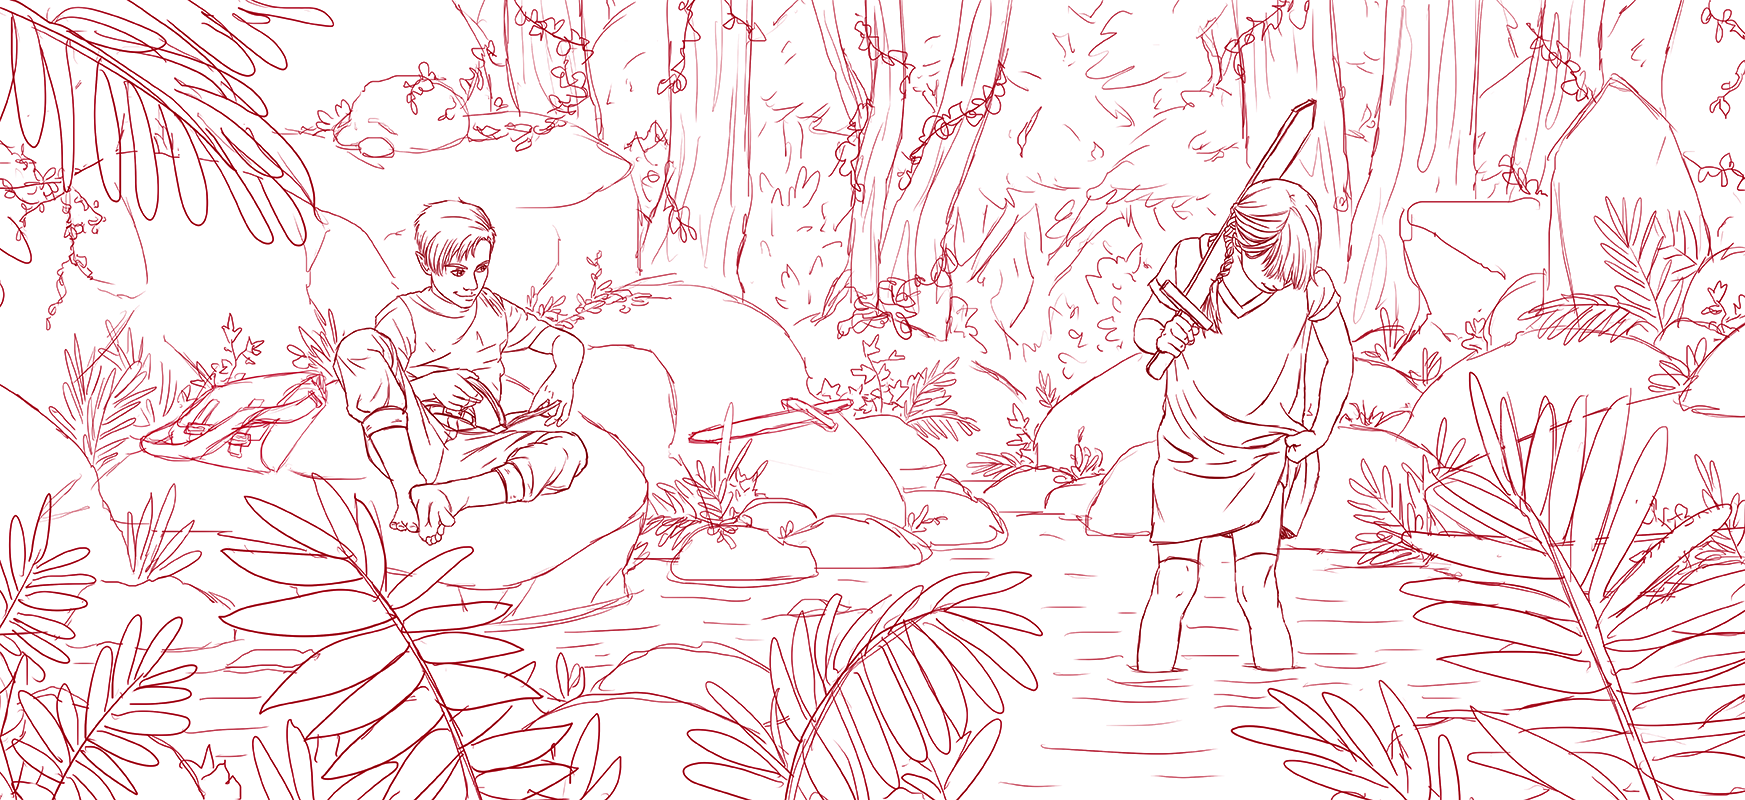 Two preteens in a jungle-like environment at a pond. The boy sits on a large rock, reading a book, his eyes drifting to the girl. She is standing in the water, holding up her dress with one hand to prevent it from getting wet and gazing into the water. In her other hand she holds a wooden sword over her shoulder.